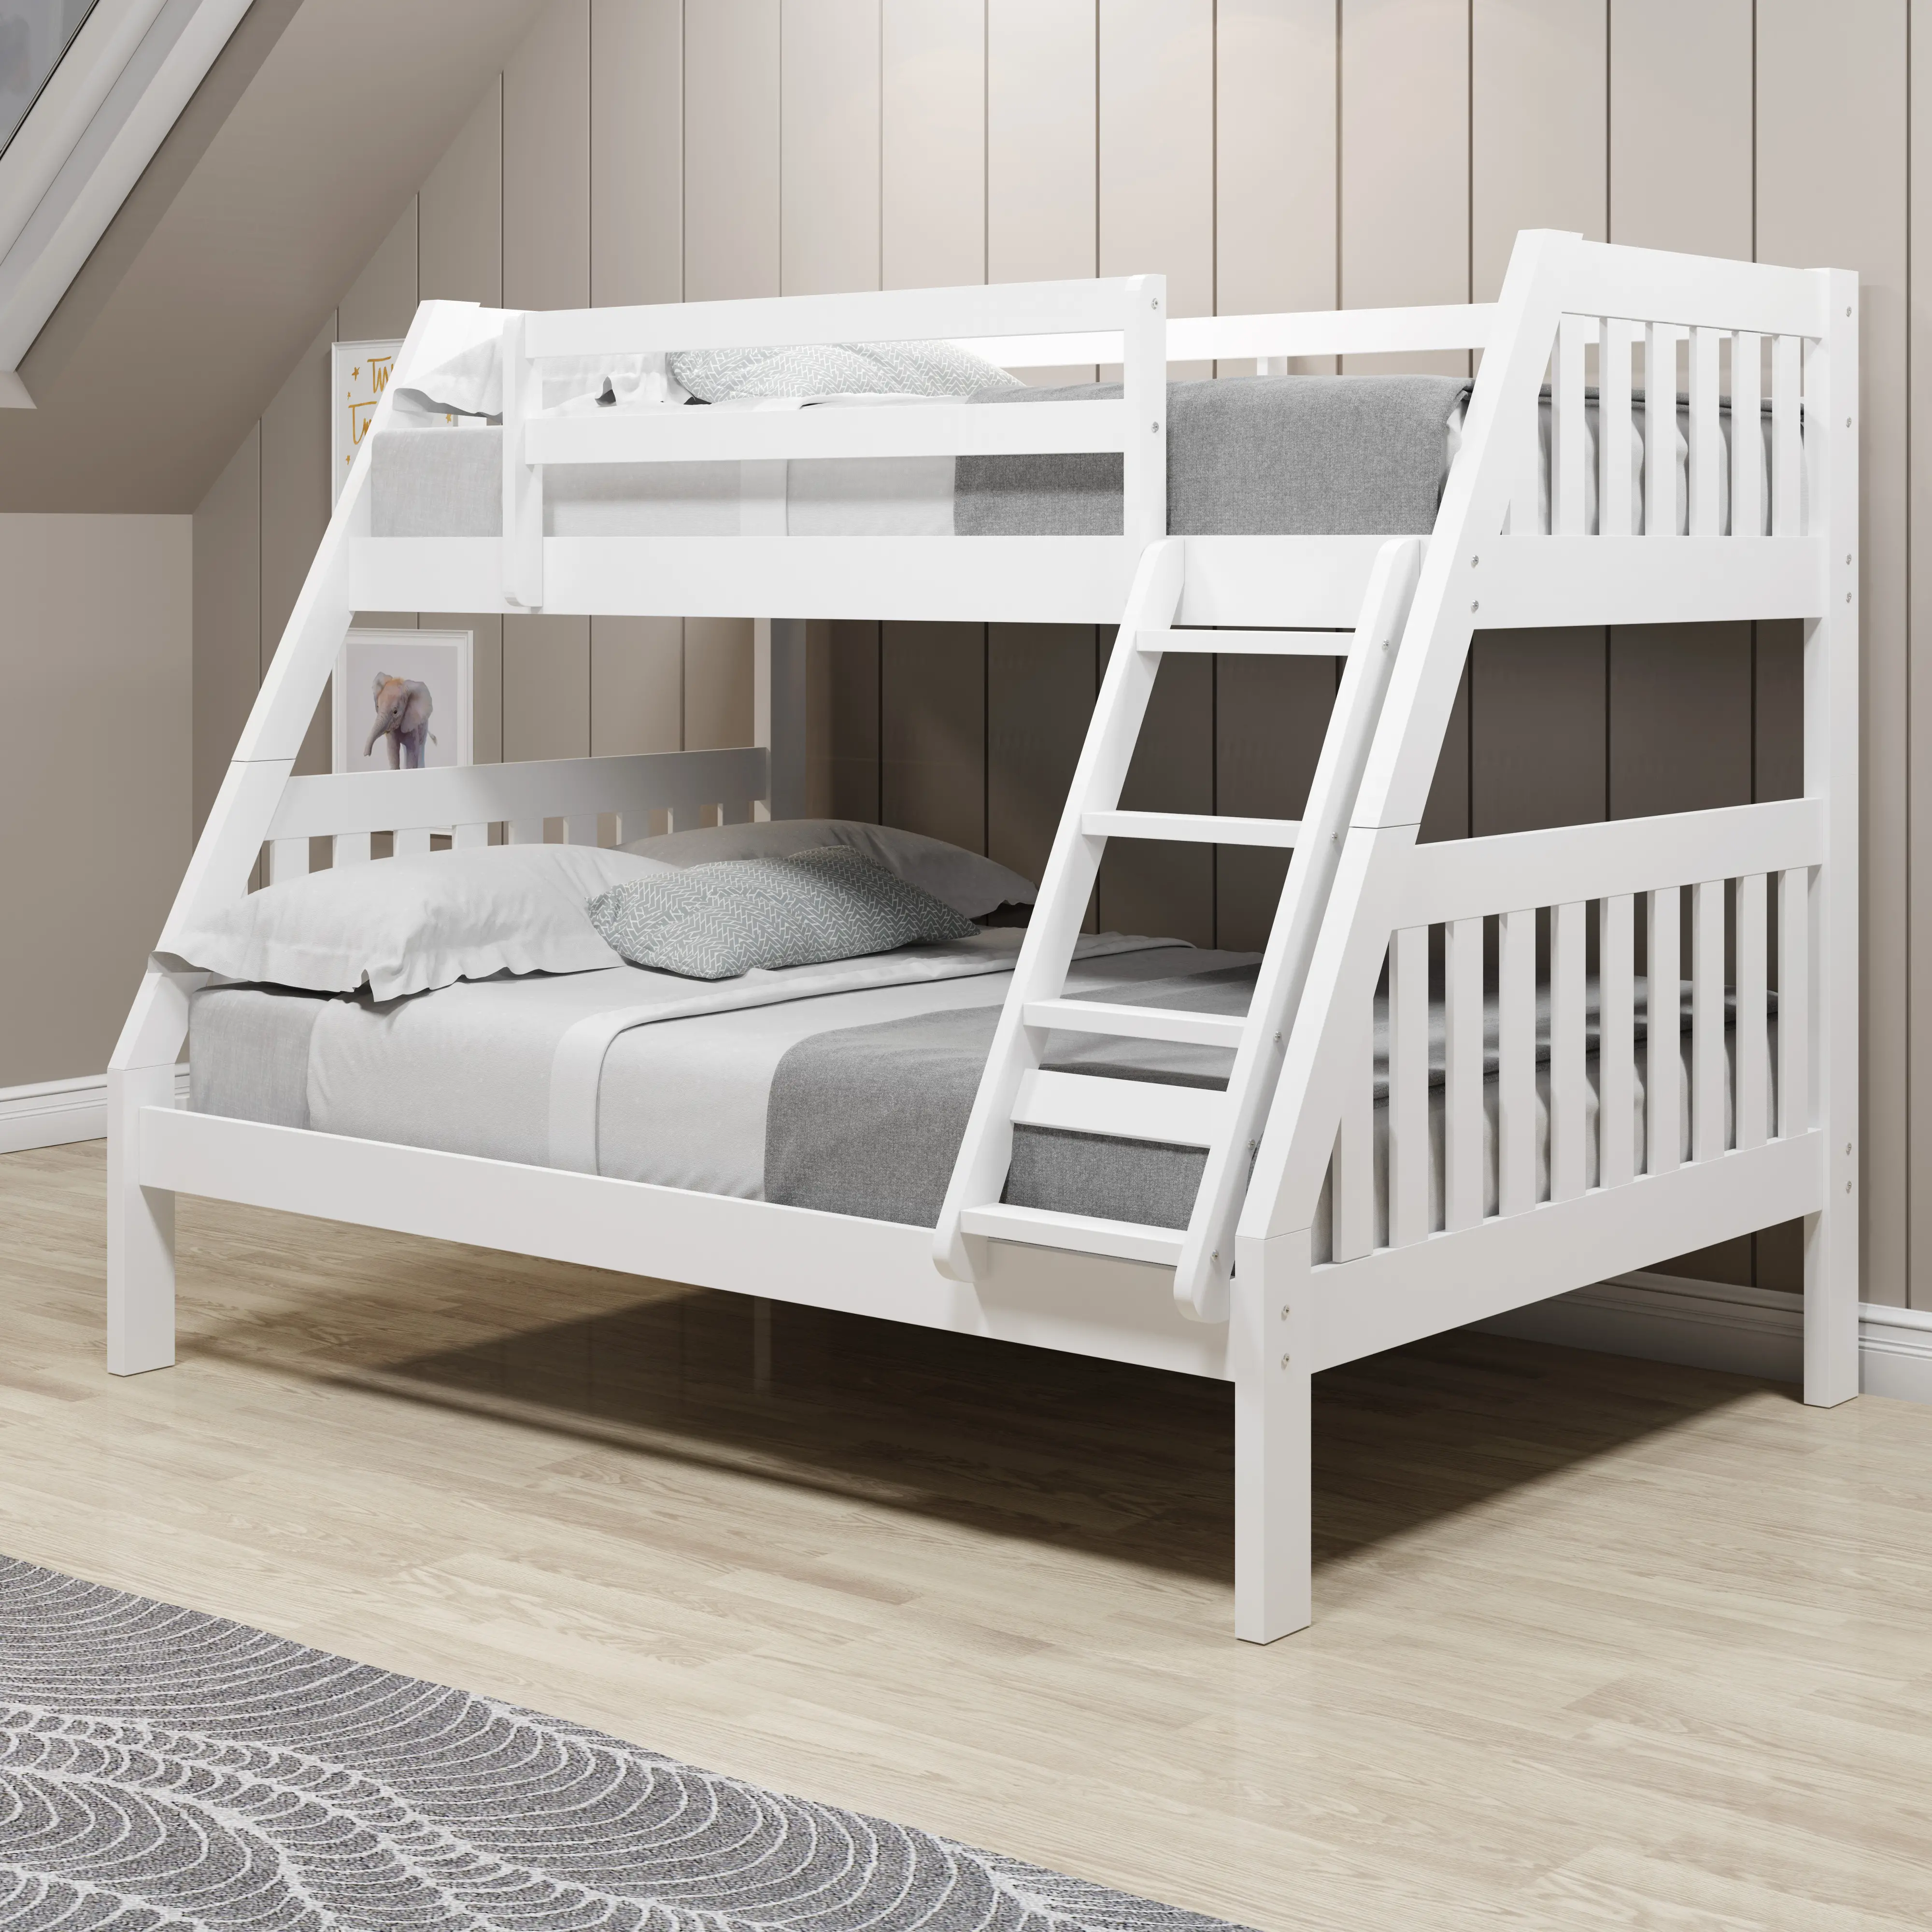 Classic White Twin over Full Bunk Bed - Mission